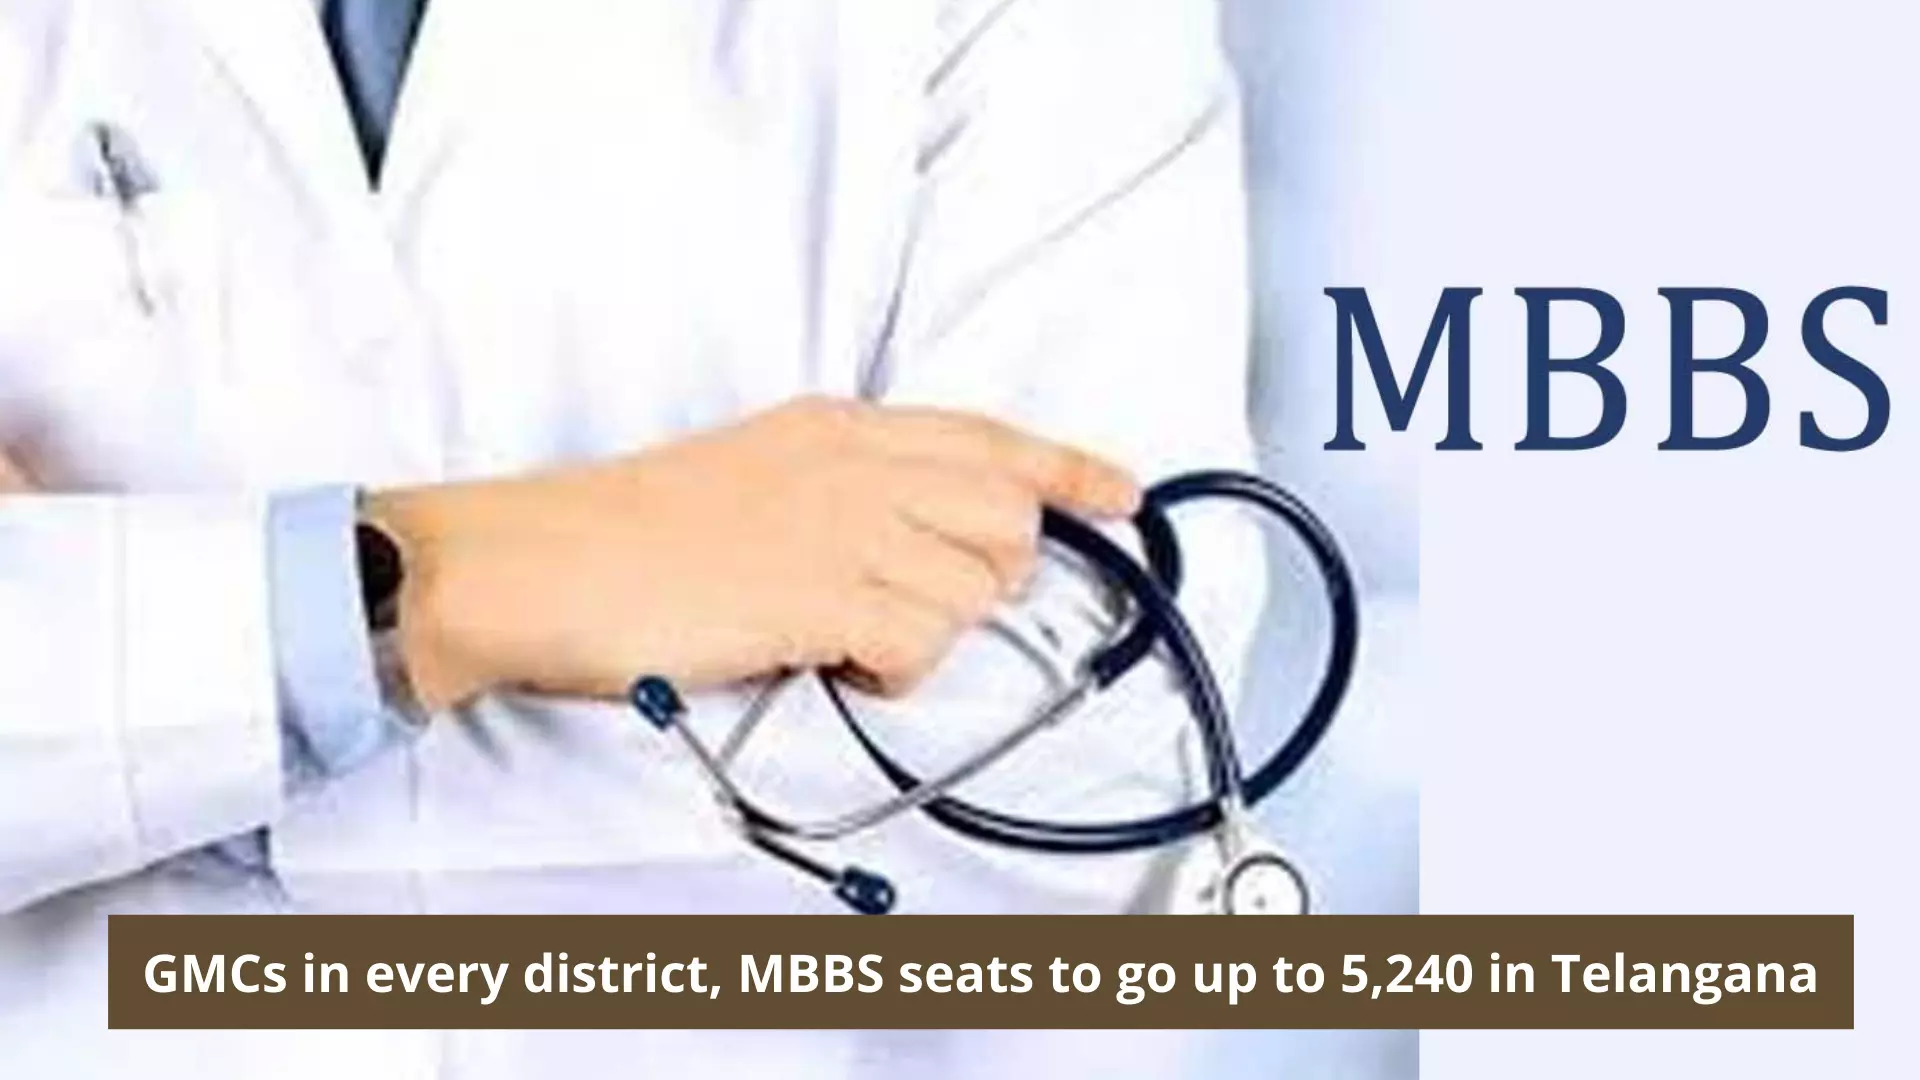 Telangana: GMCs in every district, MBBS seats to go up to 5,240